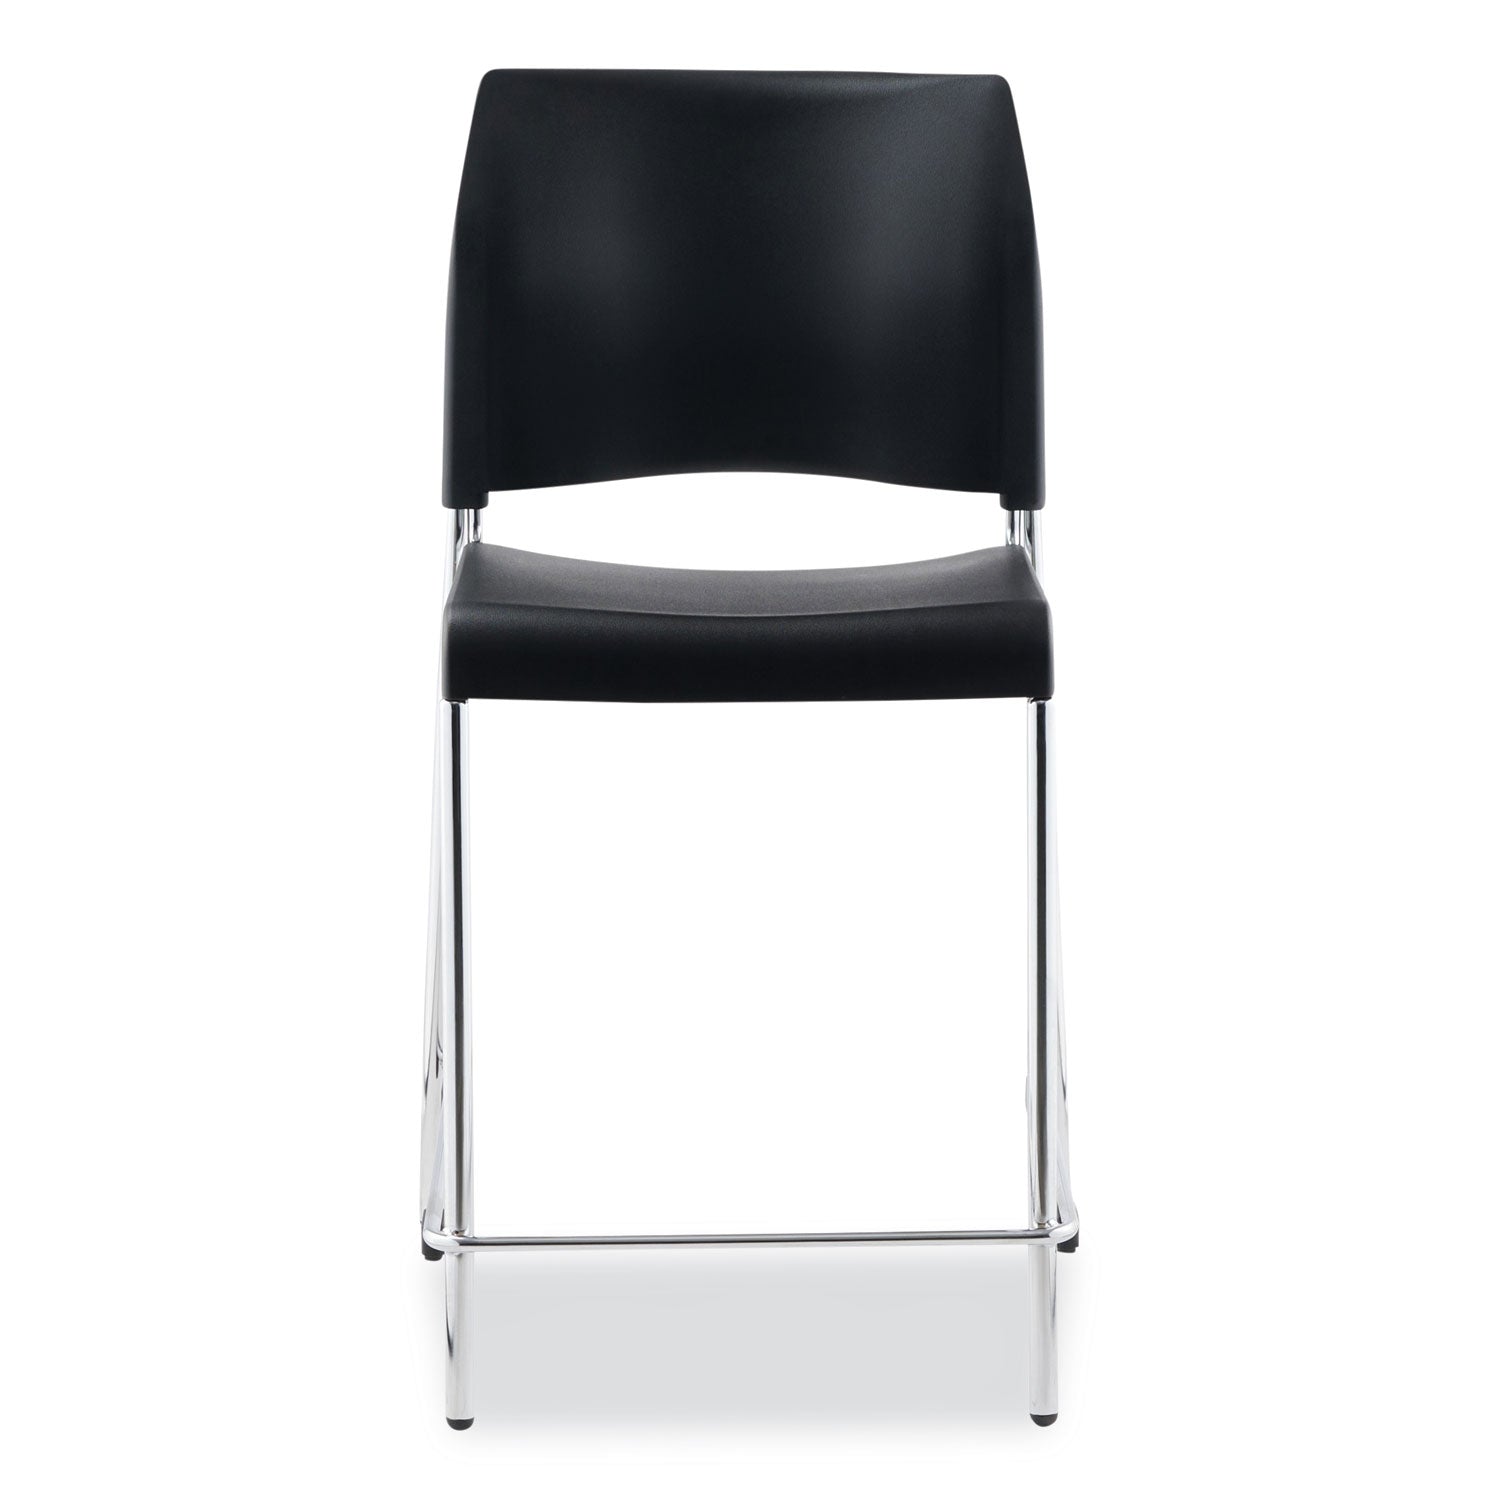 cafetorium-counter-height-stool-supports-up-to-300-lb-24-seat-height-black-seat-back-chrome-base-ships-in-1-3-bus-days_nps8810c1110 - 2